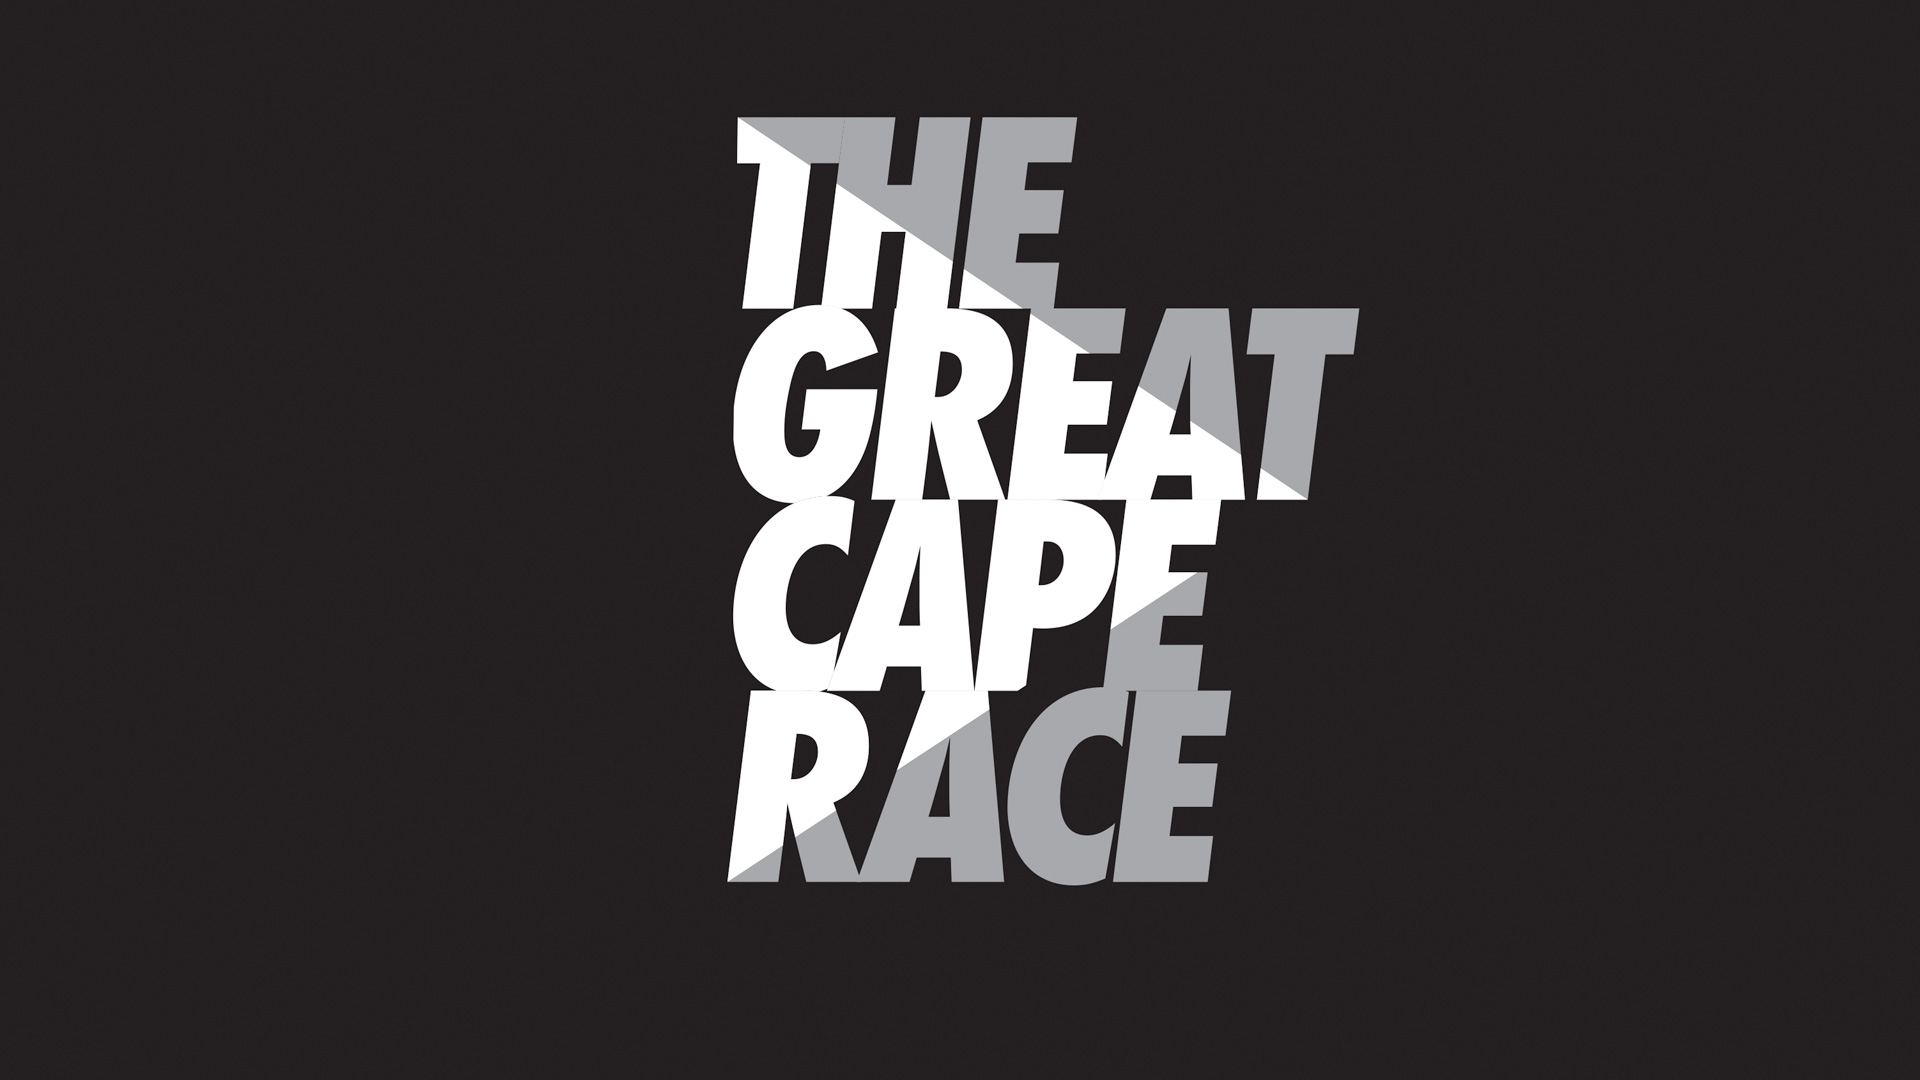 Robertstown_The_Great_Cape_Race_2